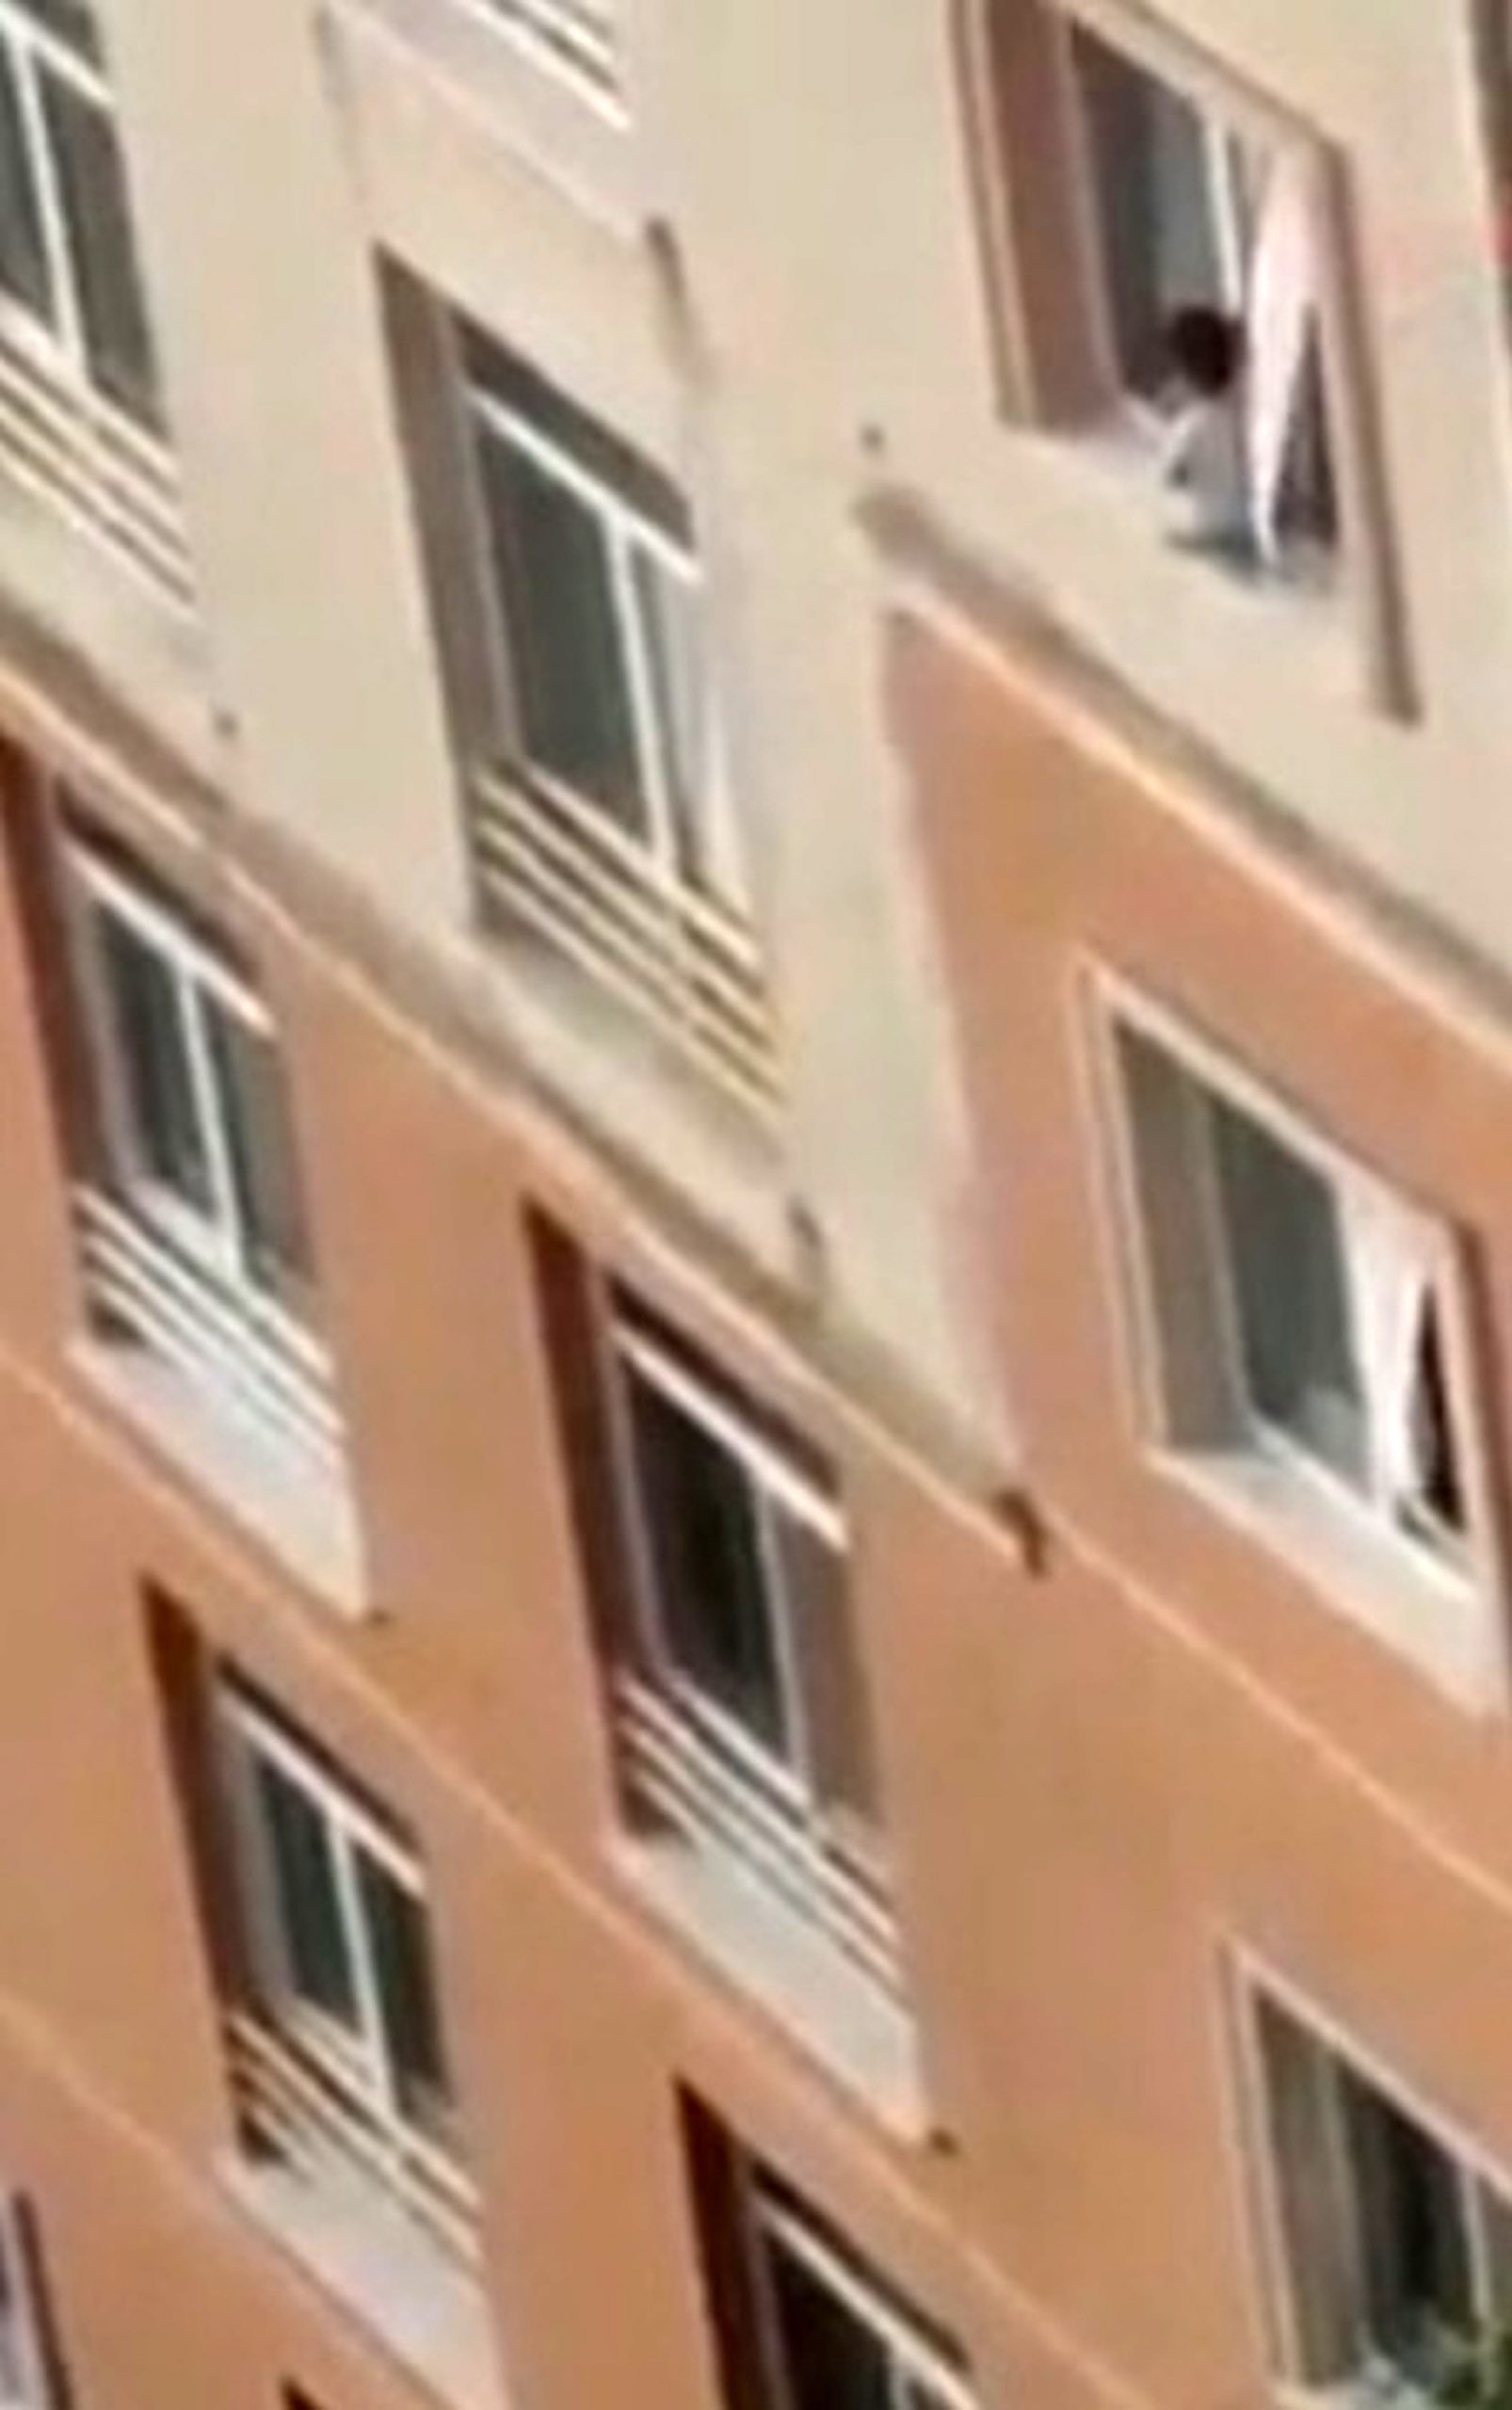 Read more about the article Shock As Toddler Plays On High Rise Window Ledge